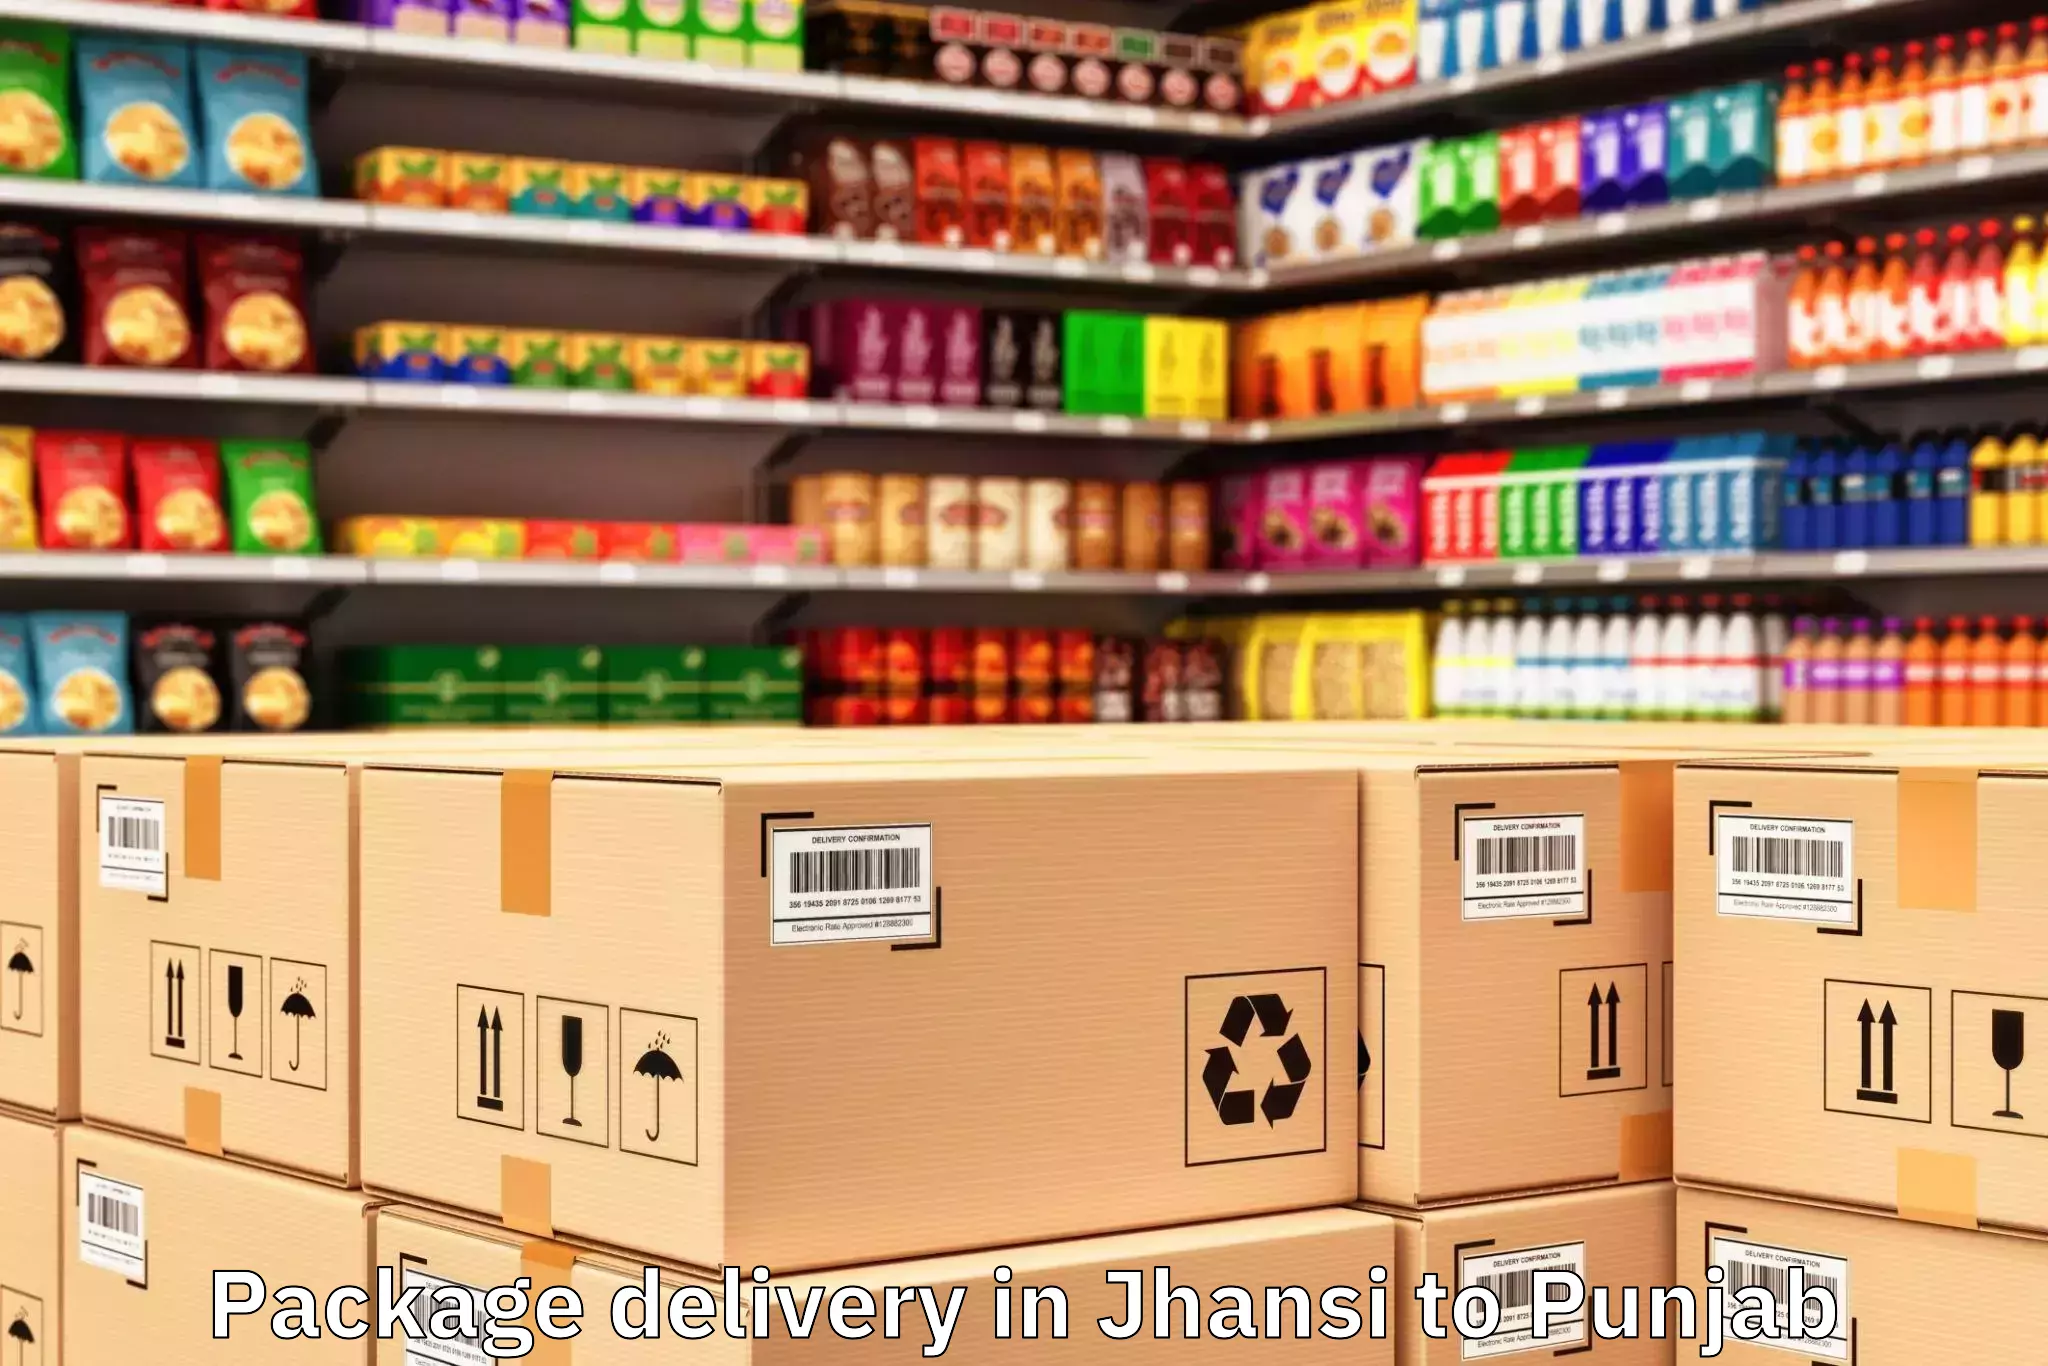 Professional Jhansi to Punjab Package Delivery